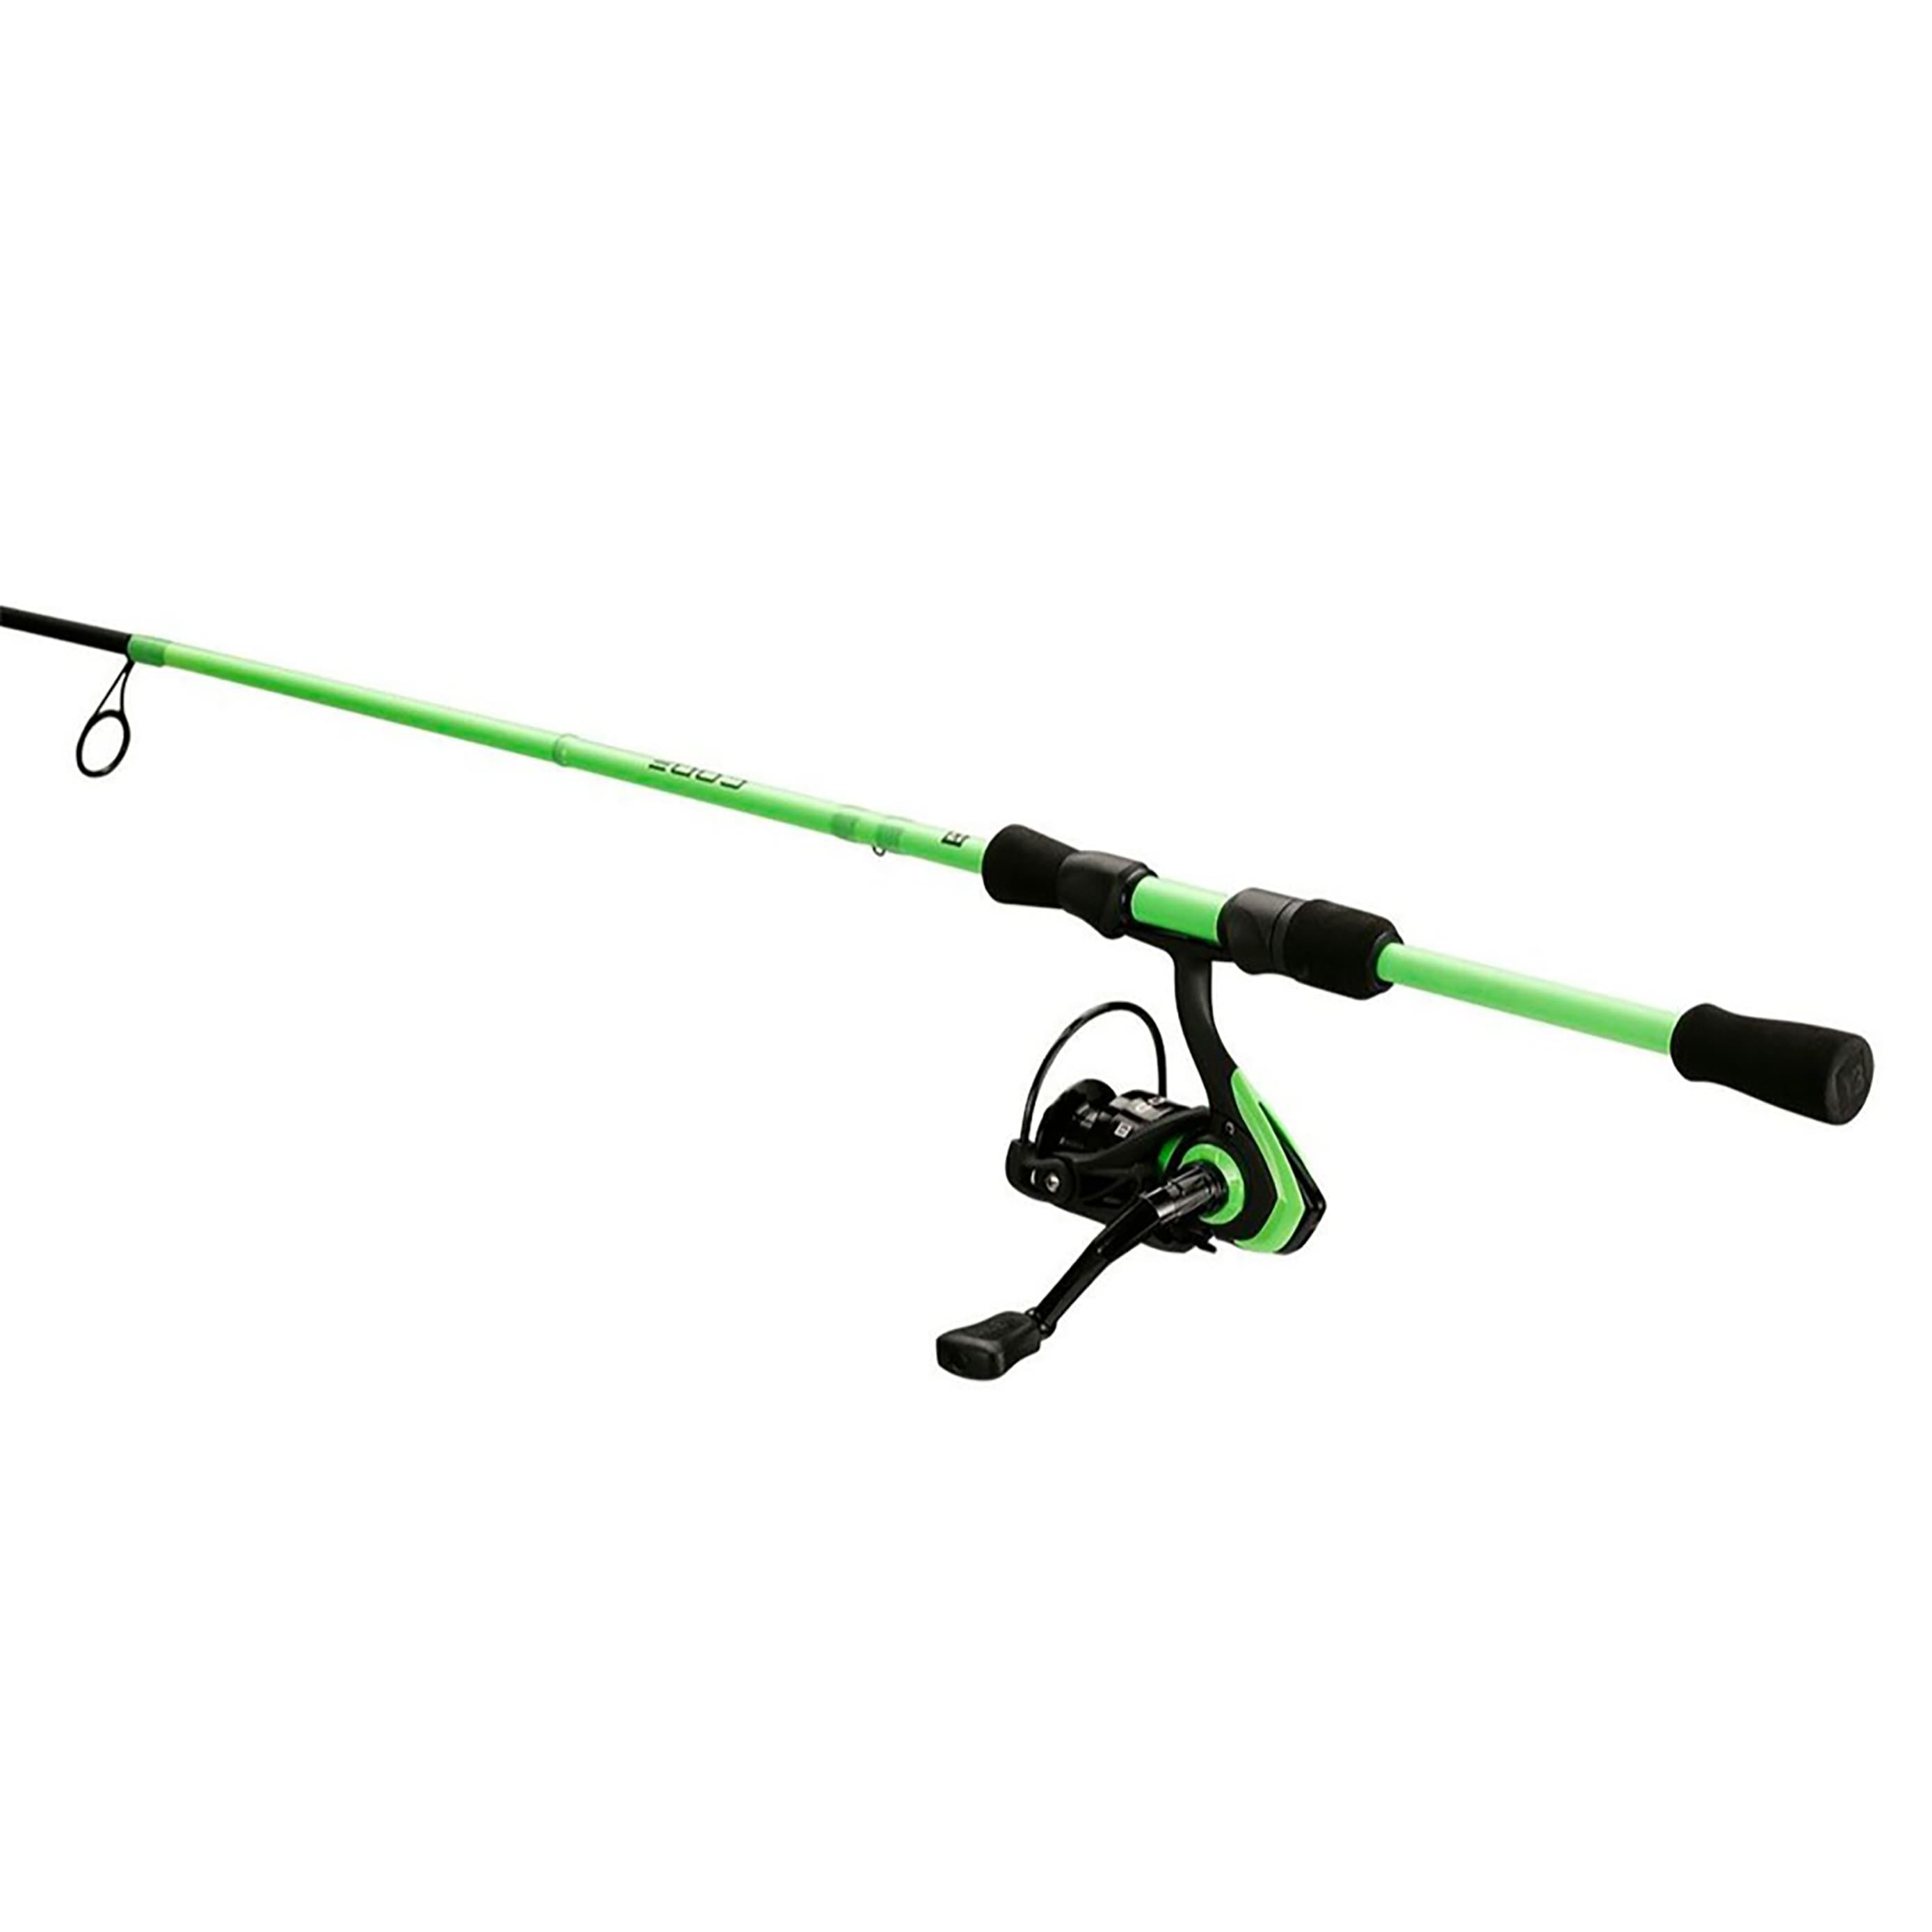 Premium Fishing Rod and Reel Combo - Smooth Retrieves, Soft Touch